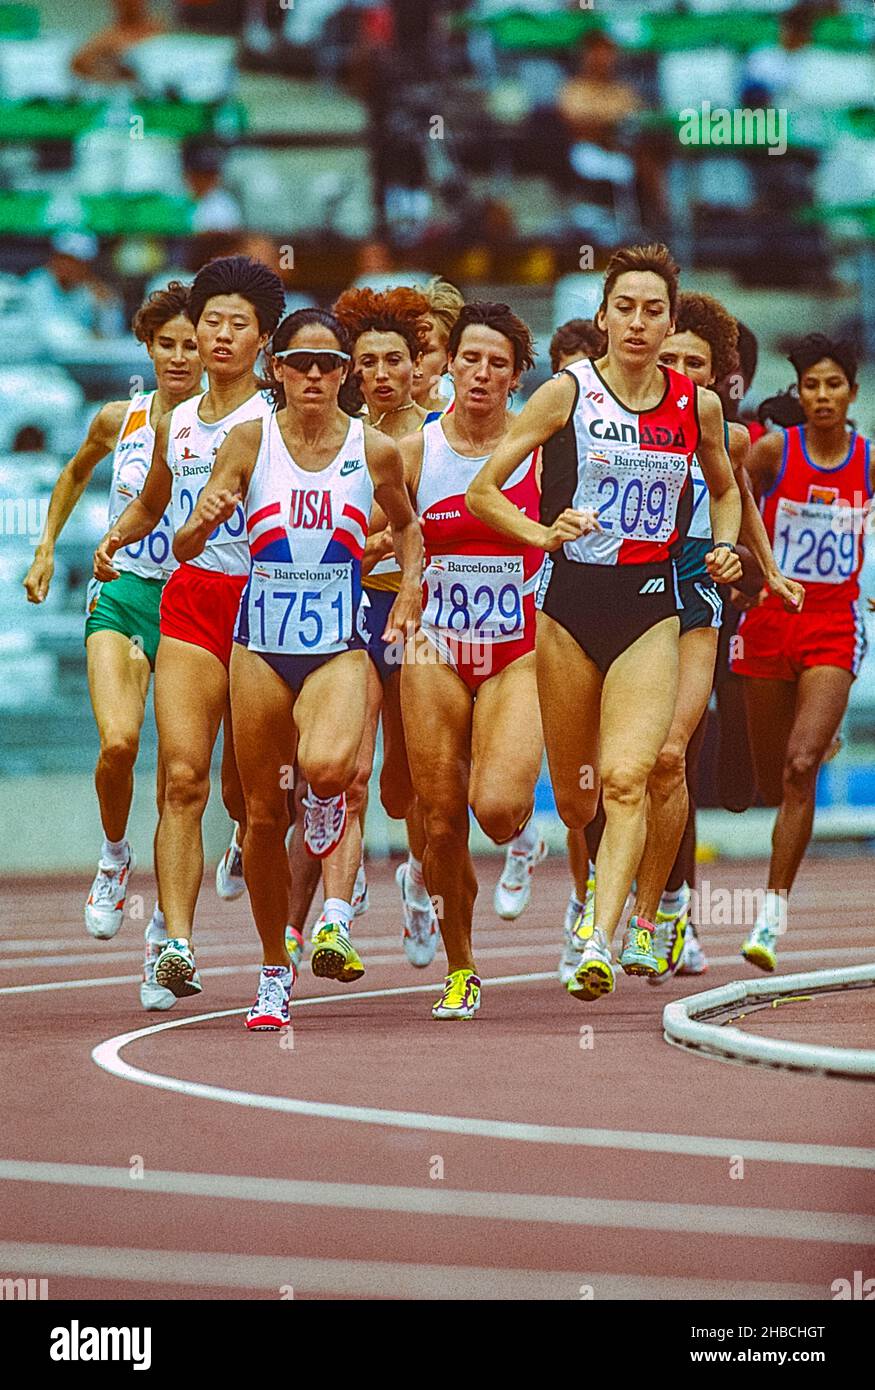 PattiSue Plumer (USA) -1751- and Theresia Kiesl (AUS-1829 and Angela Chalmers (CAN) competing in the women's 1500m R1 H3 at the 1992 Olympic Summer Games. Stock Photo